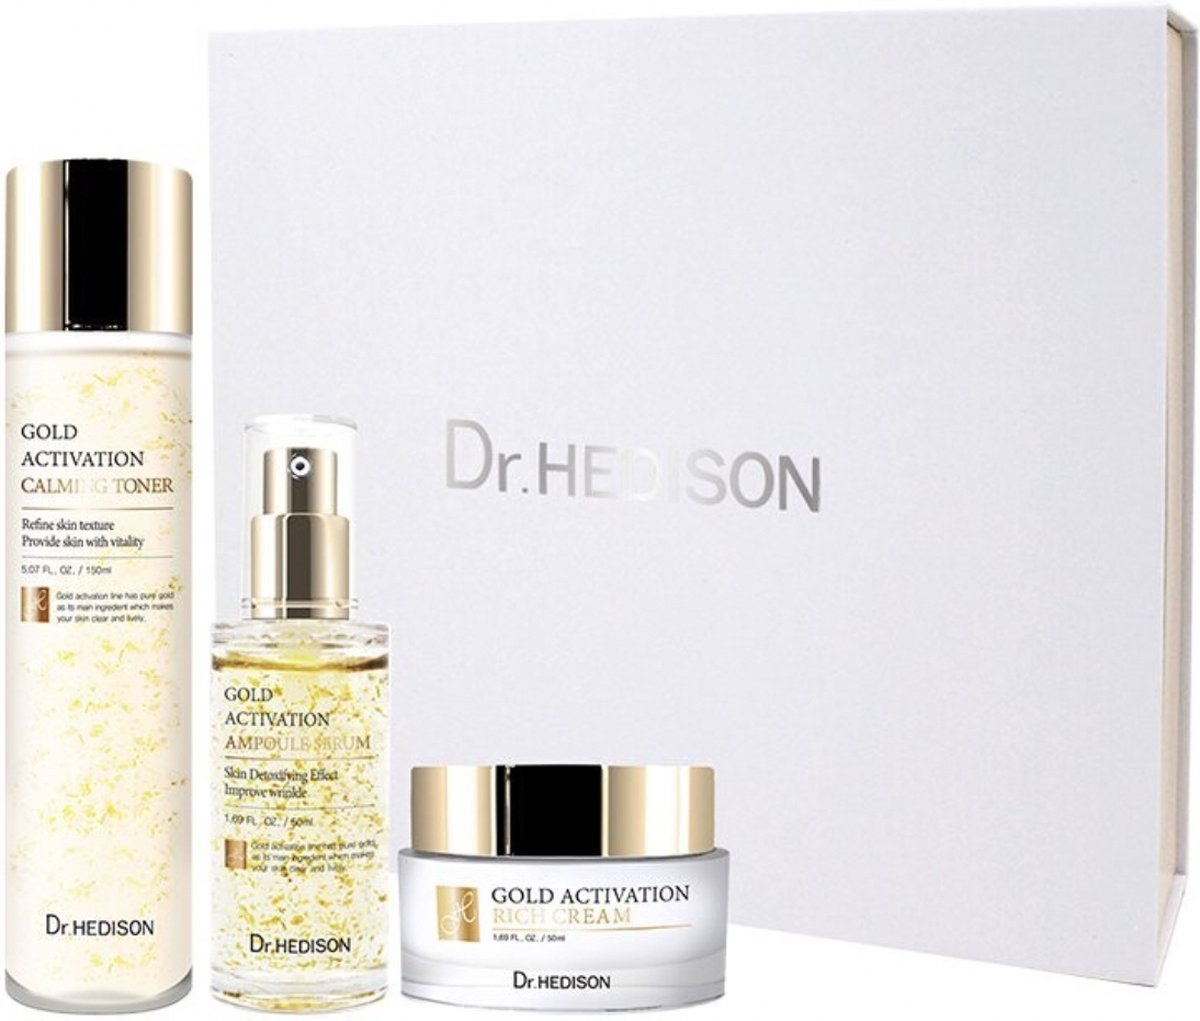 Dr. Hedison - Gold Activation Gift Set - [K-Beauty & Cosmetica]